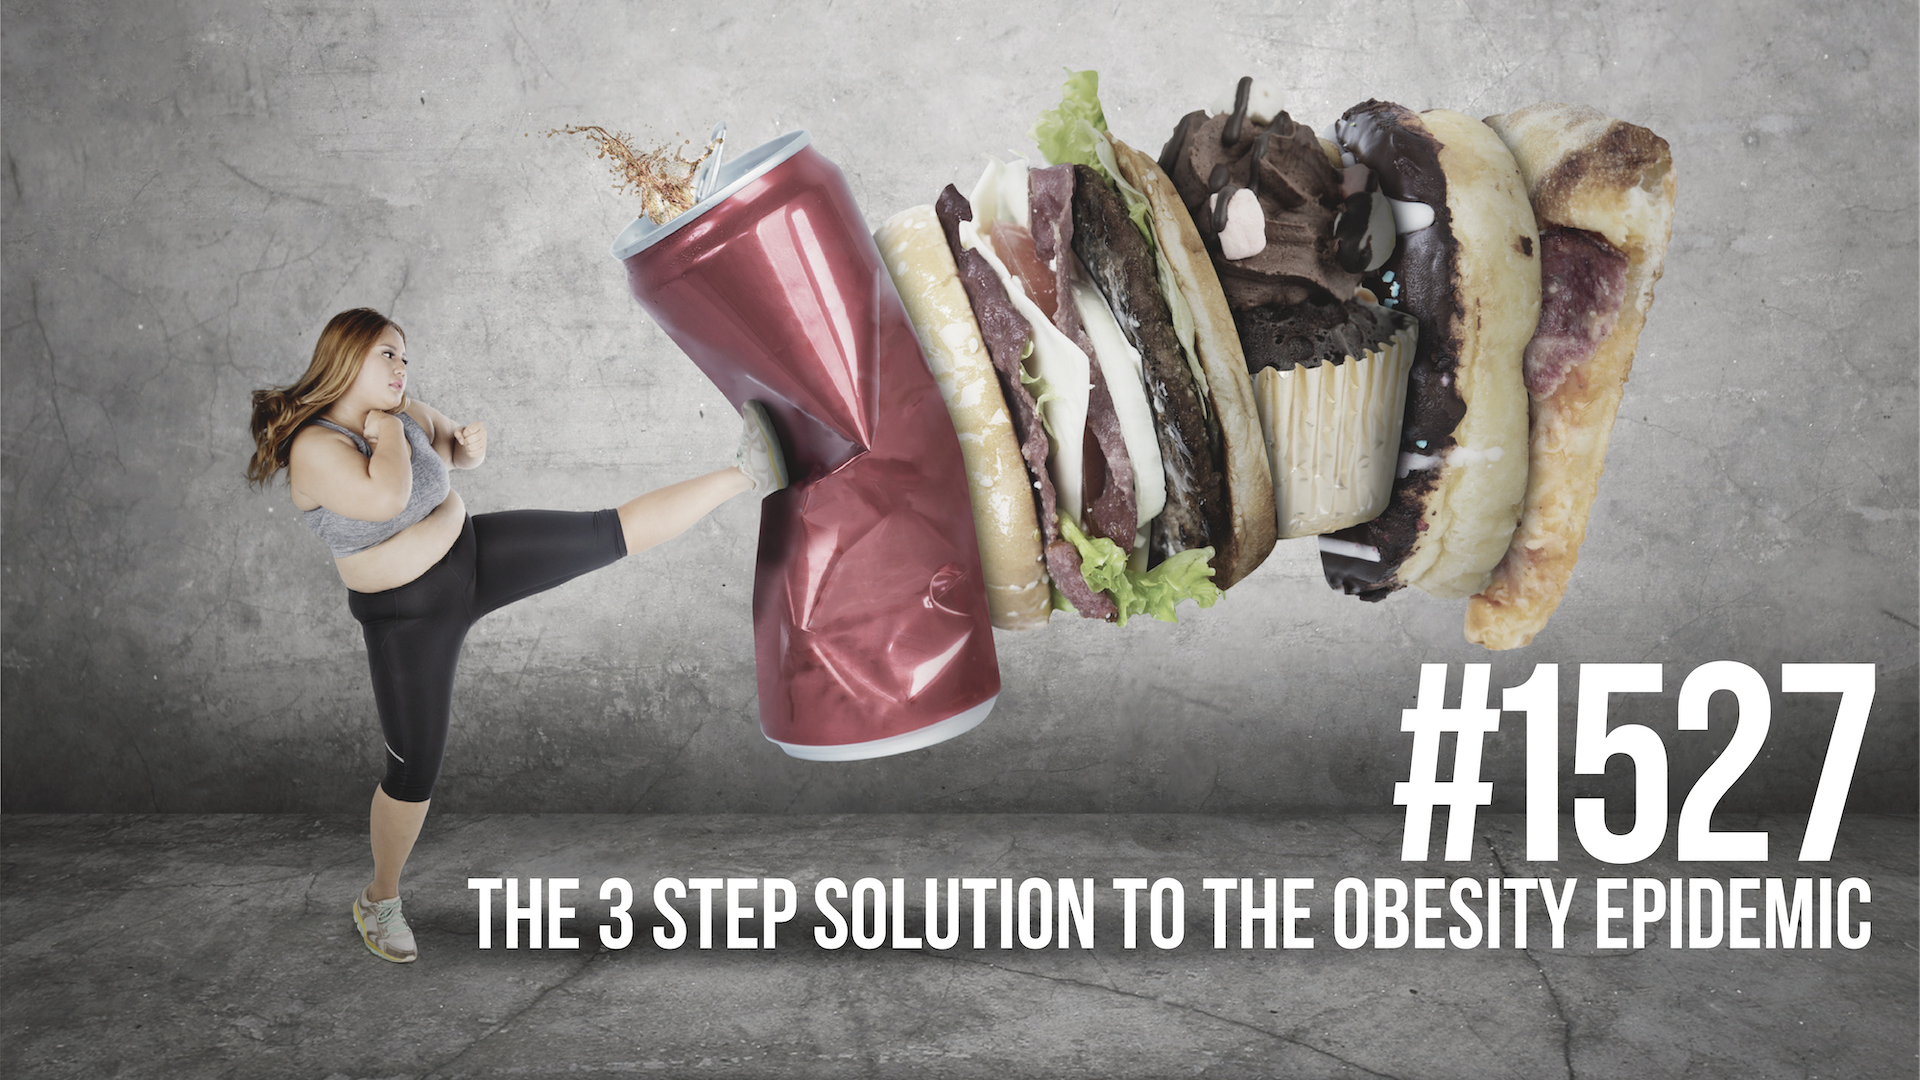 1527: The 3 Step Solution to the Obesity Epidemic